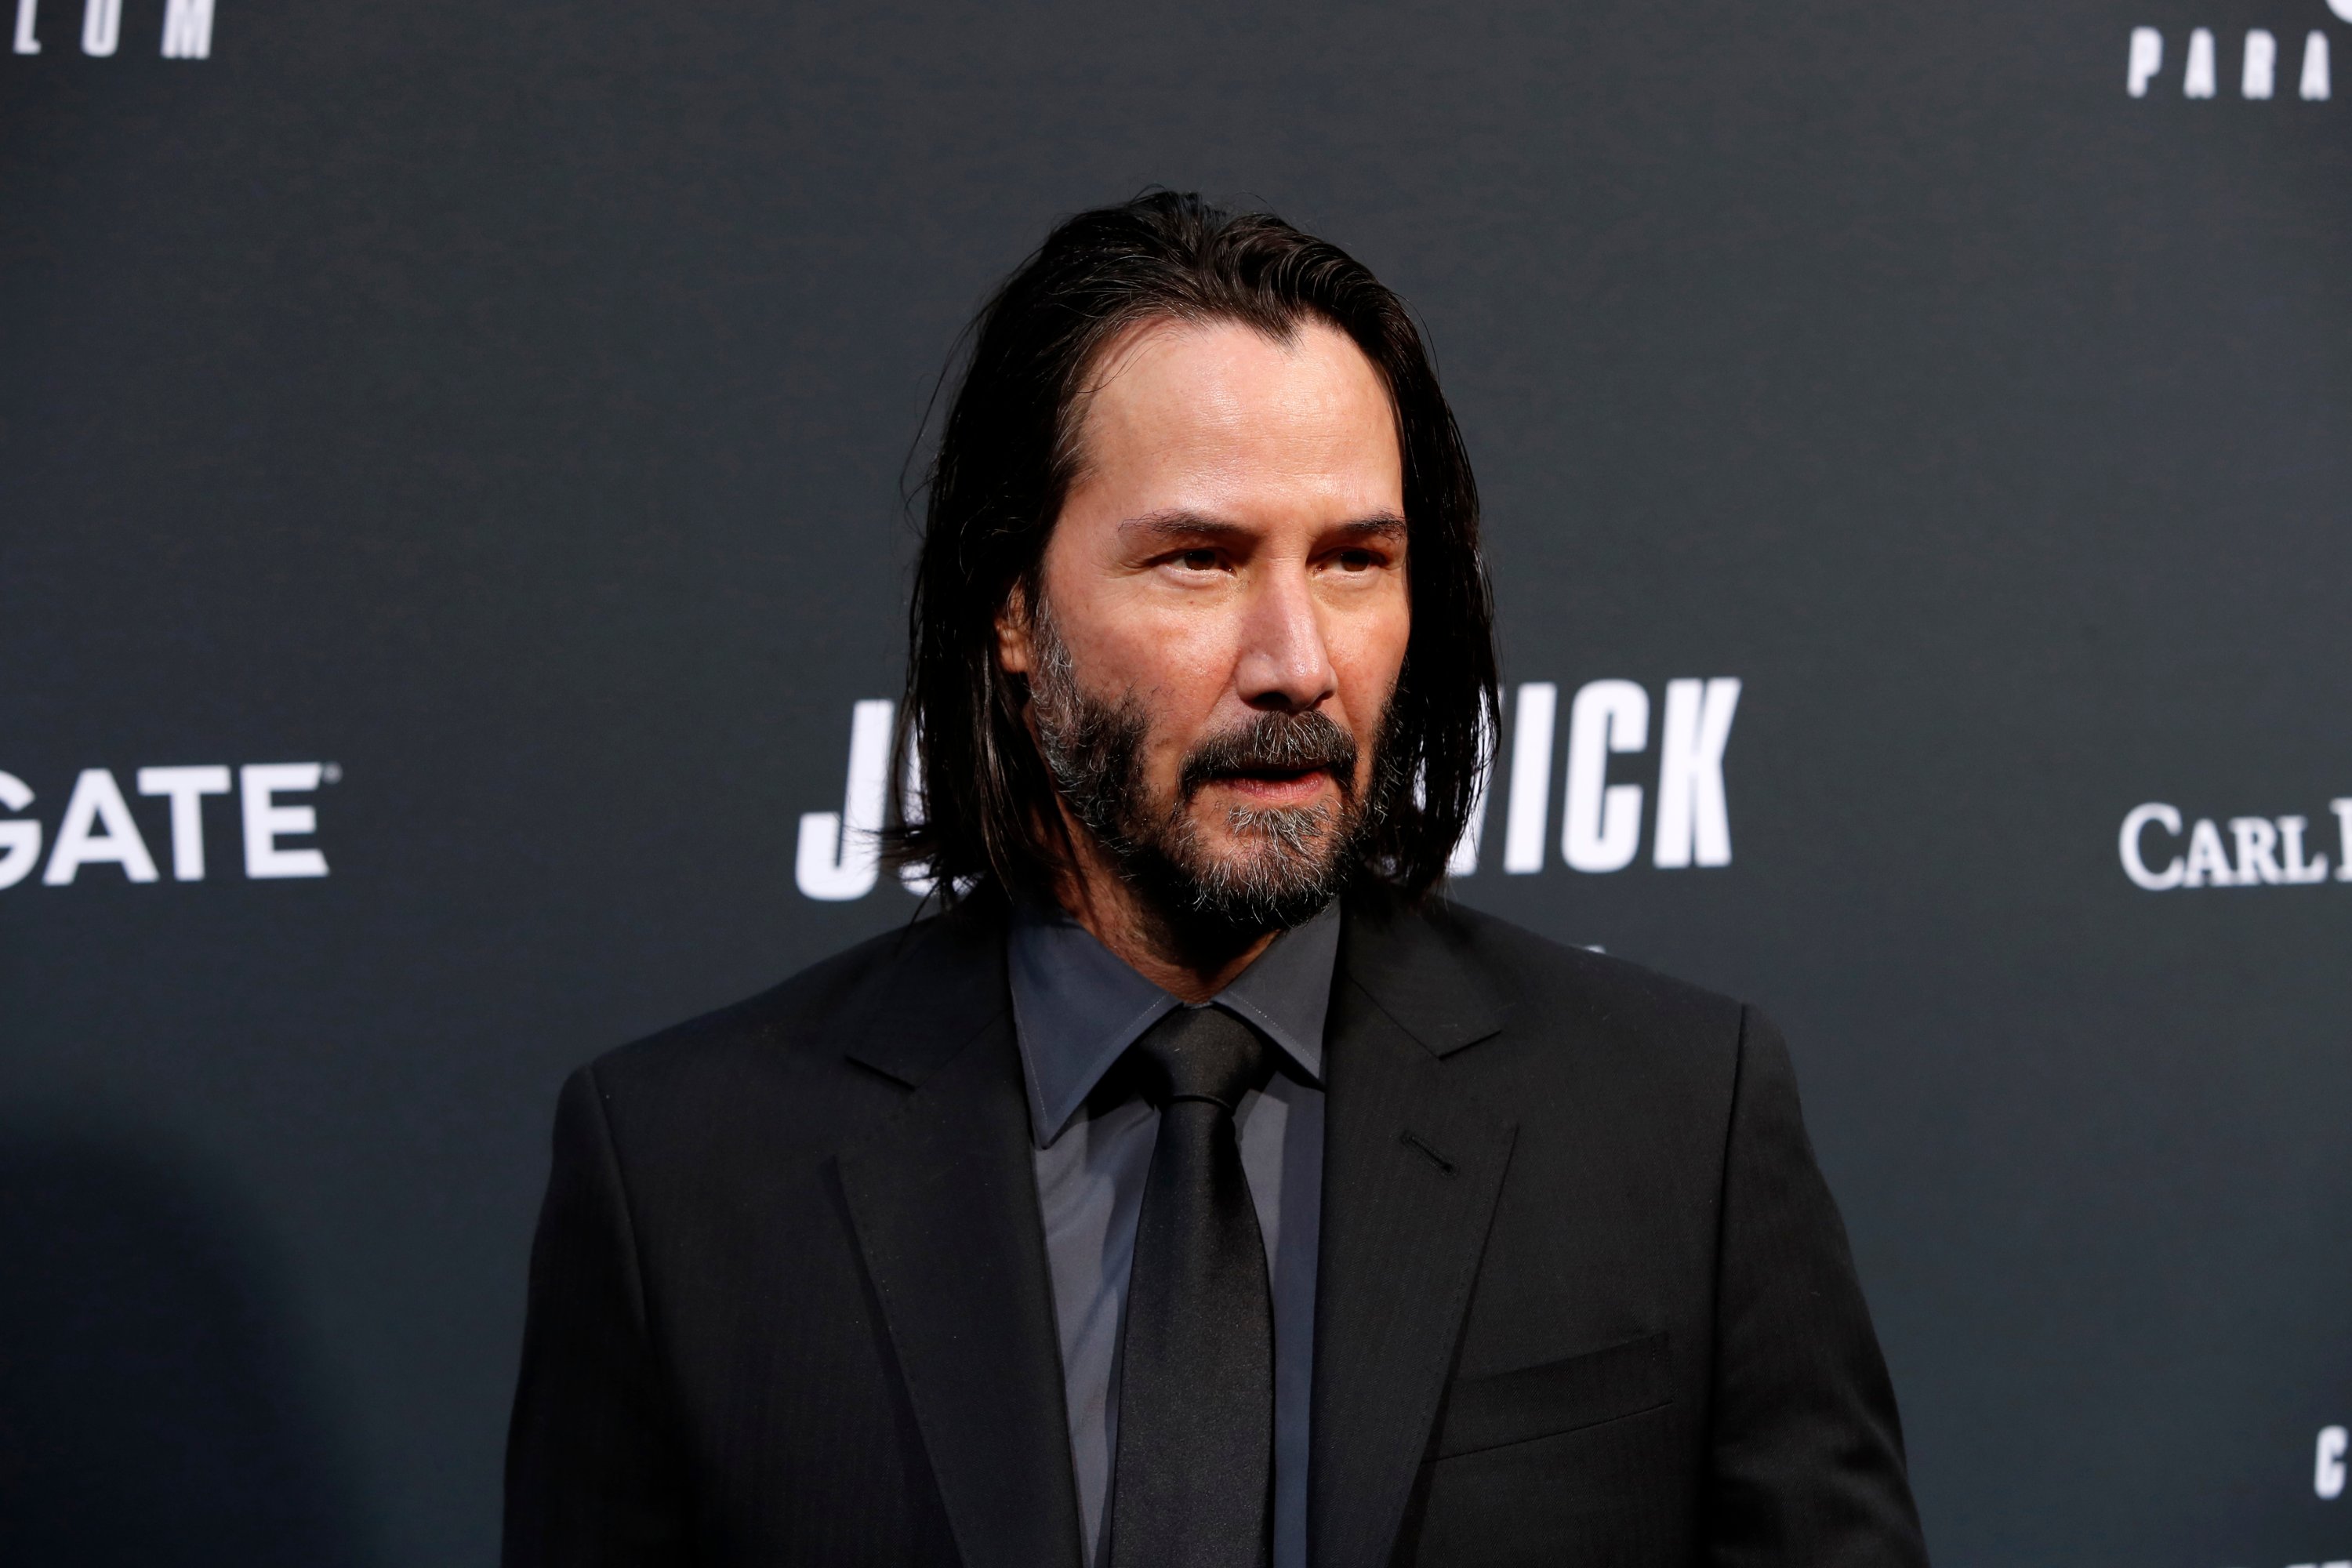 Is John Wick 5 Happening With Keanu Reeves? Here's The Latest From The  Director